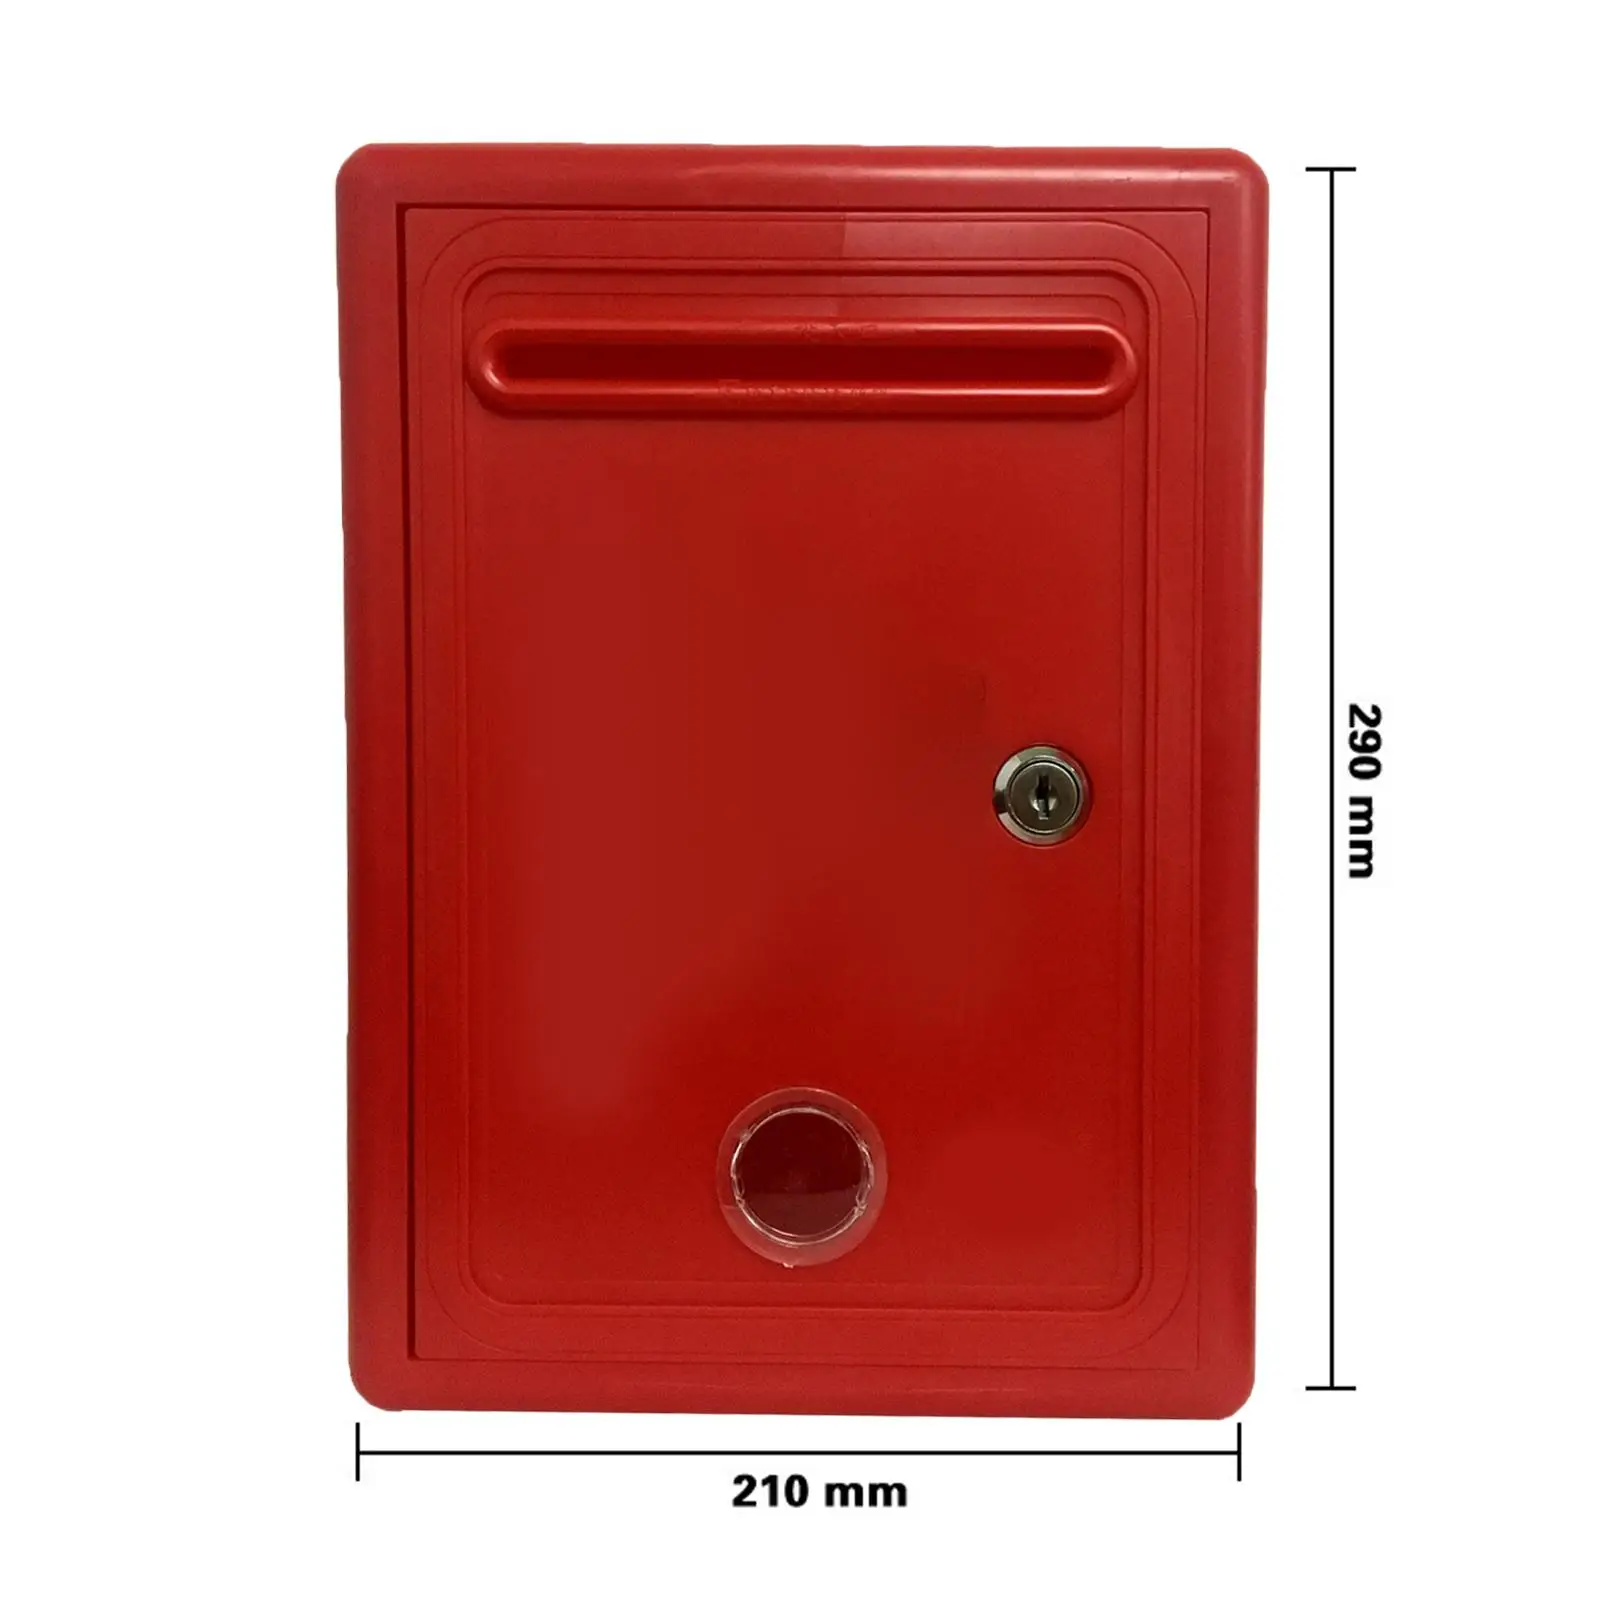 Suggestion Box, Comment Box, Complaint Box with Key Lock, Waterproof Ticket Box,